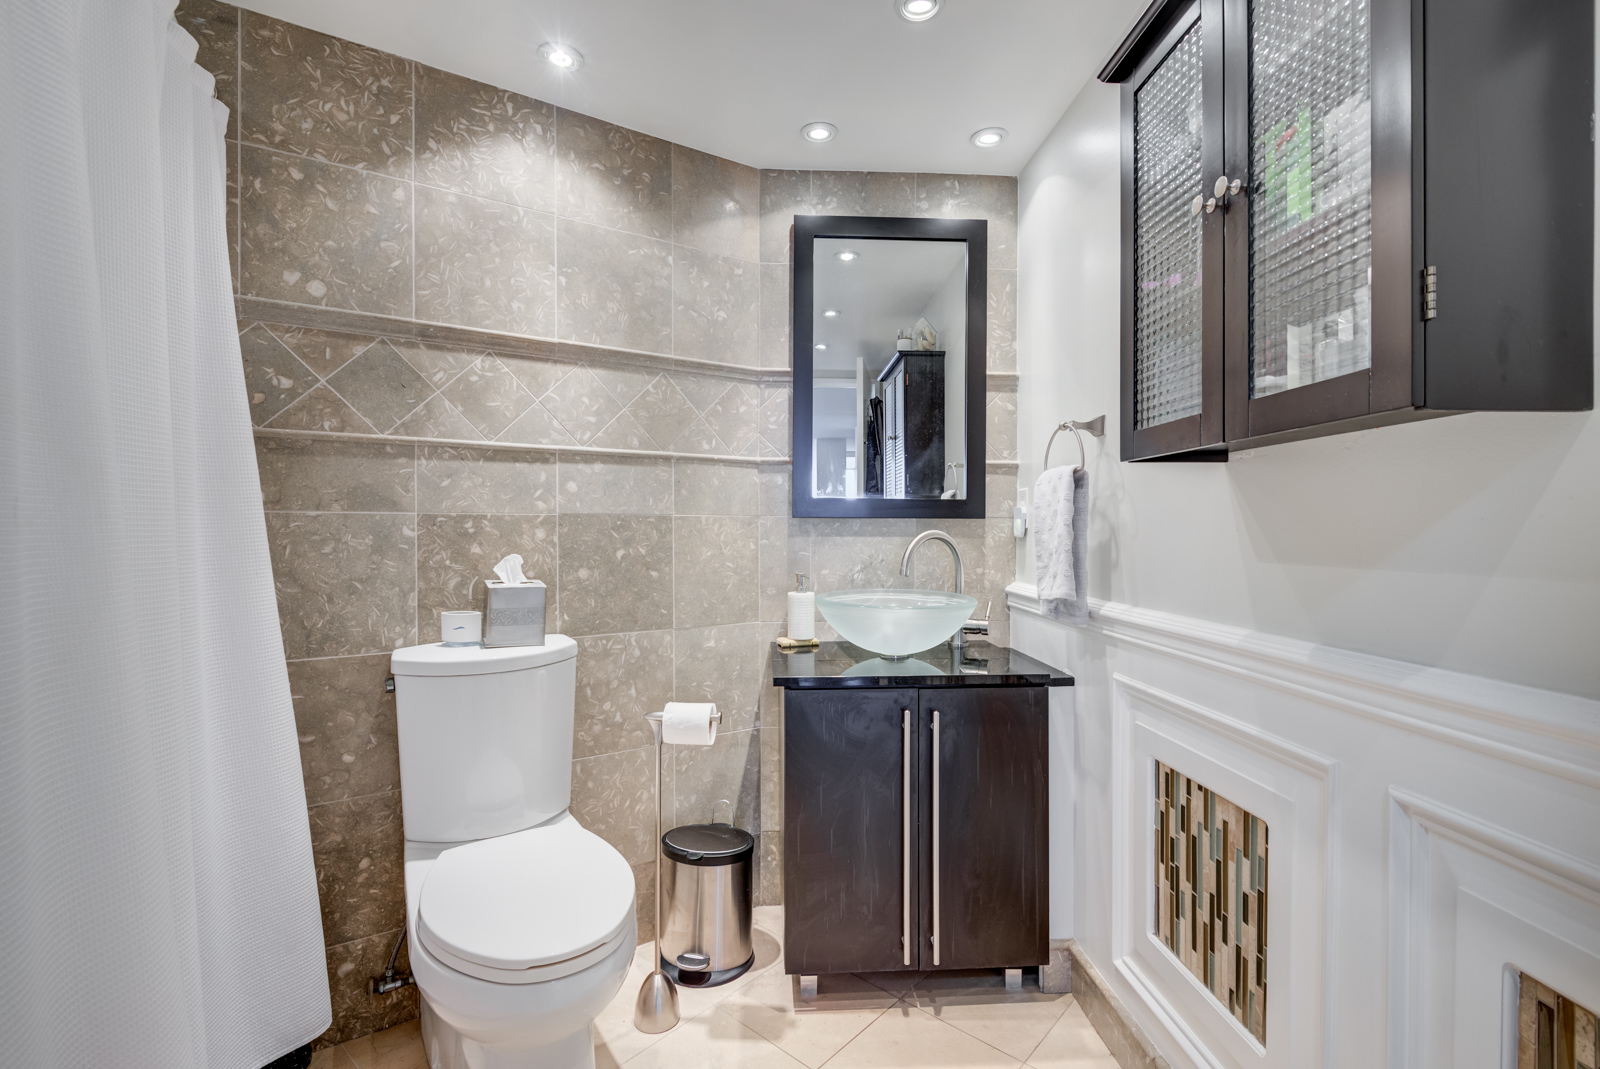 Contemporary bathroom with ceramic tiles, brown vanity, medicine cabinet, and vessel sink bowl of glass.